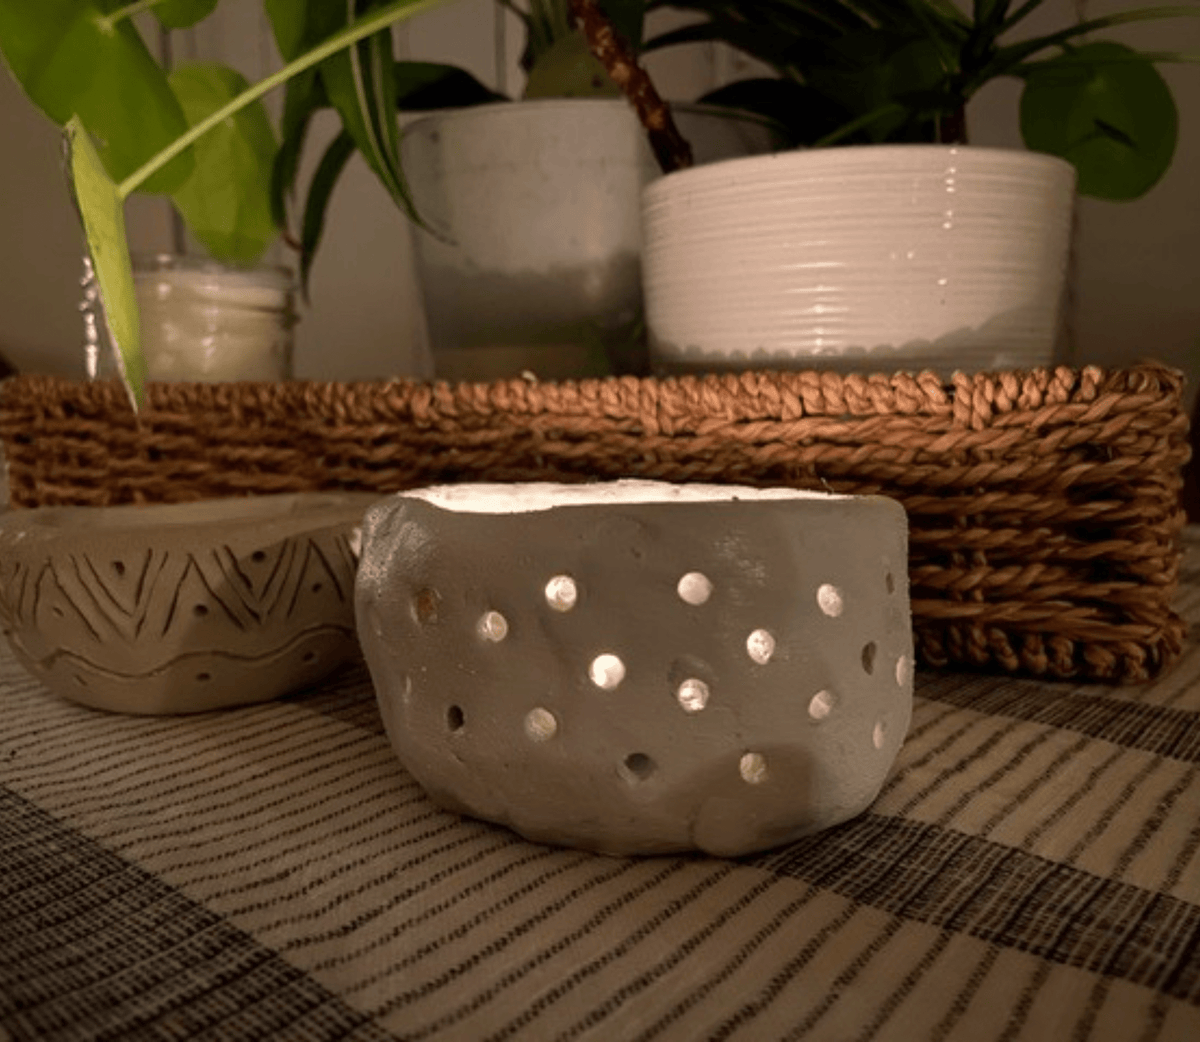 Clay Date Night Pottery Class — 10/19 (Norwich CT)